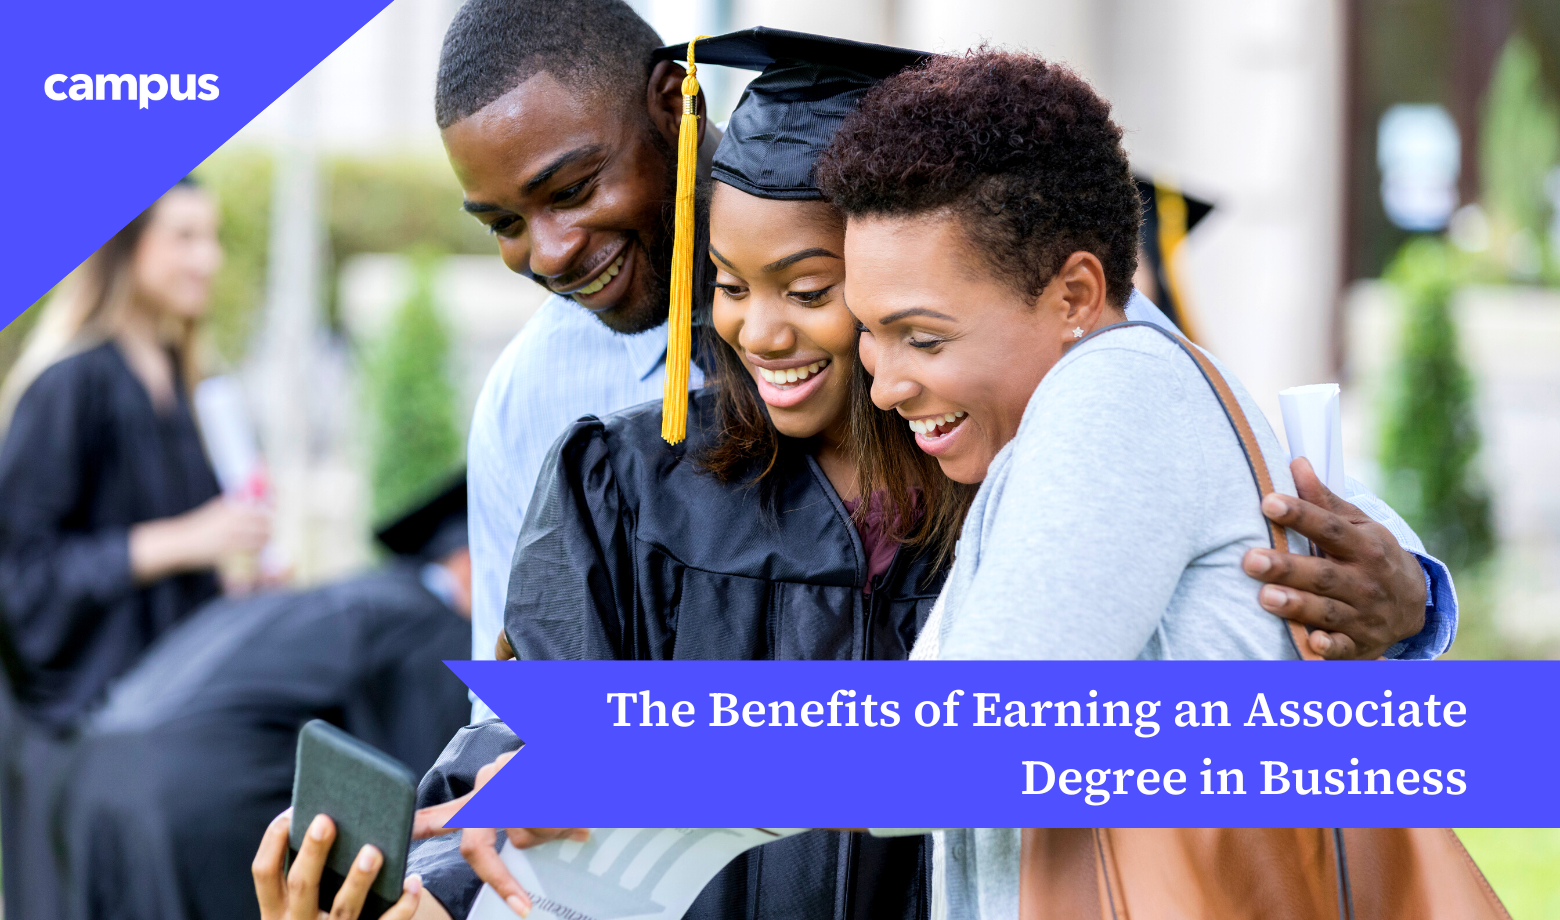 The Benefits of Earning an Associate Degree in Business